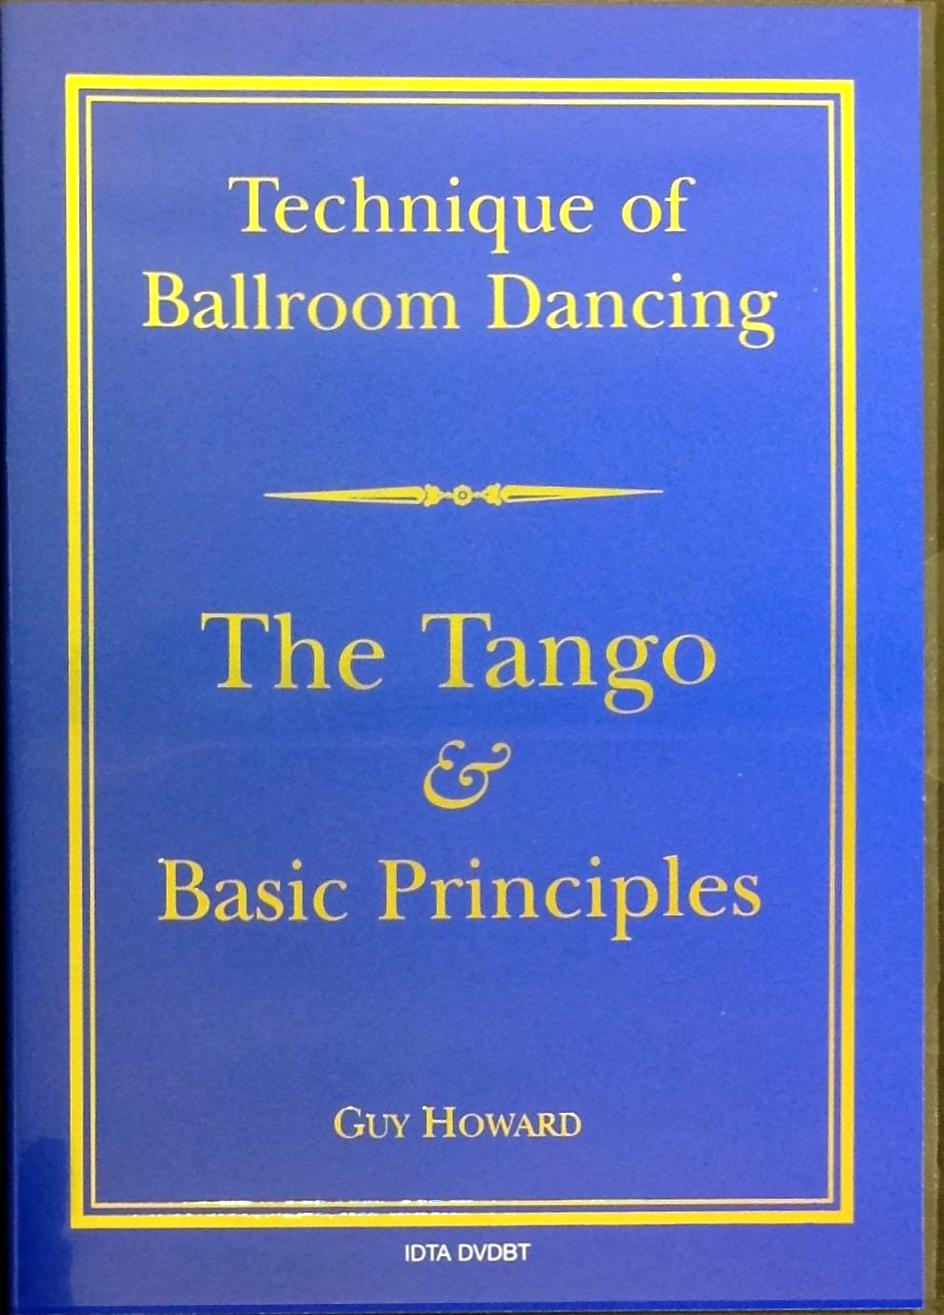 TECHNIQUE OF BALLROOM DANCING - THE TANGO AND BASC PRINCIPLES DVD BY GUY HOWARD